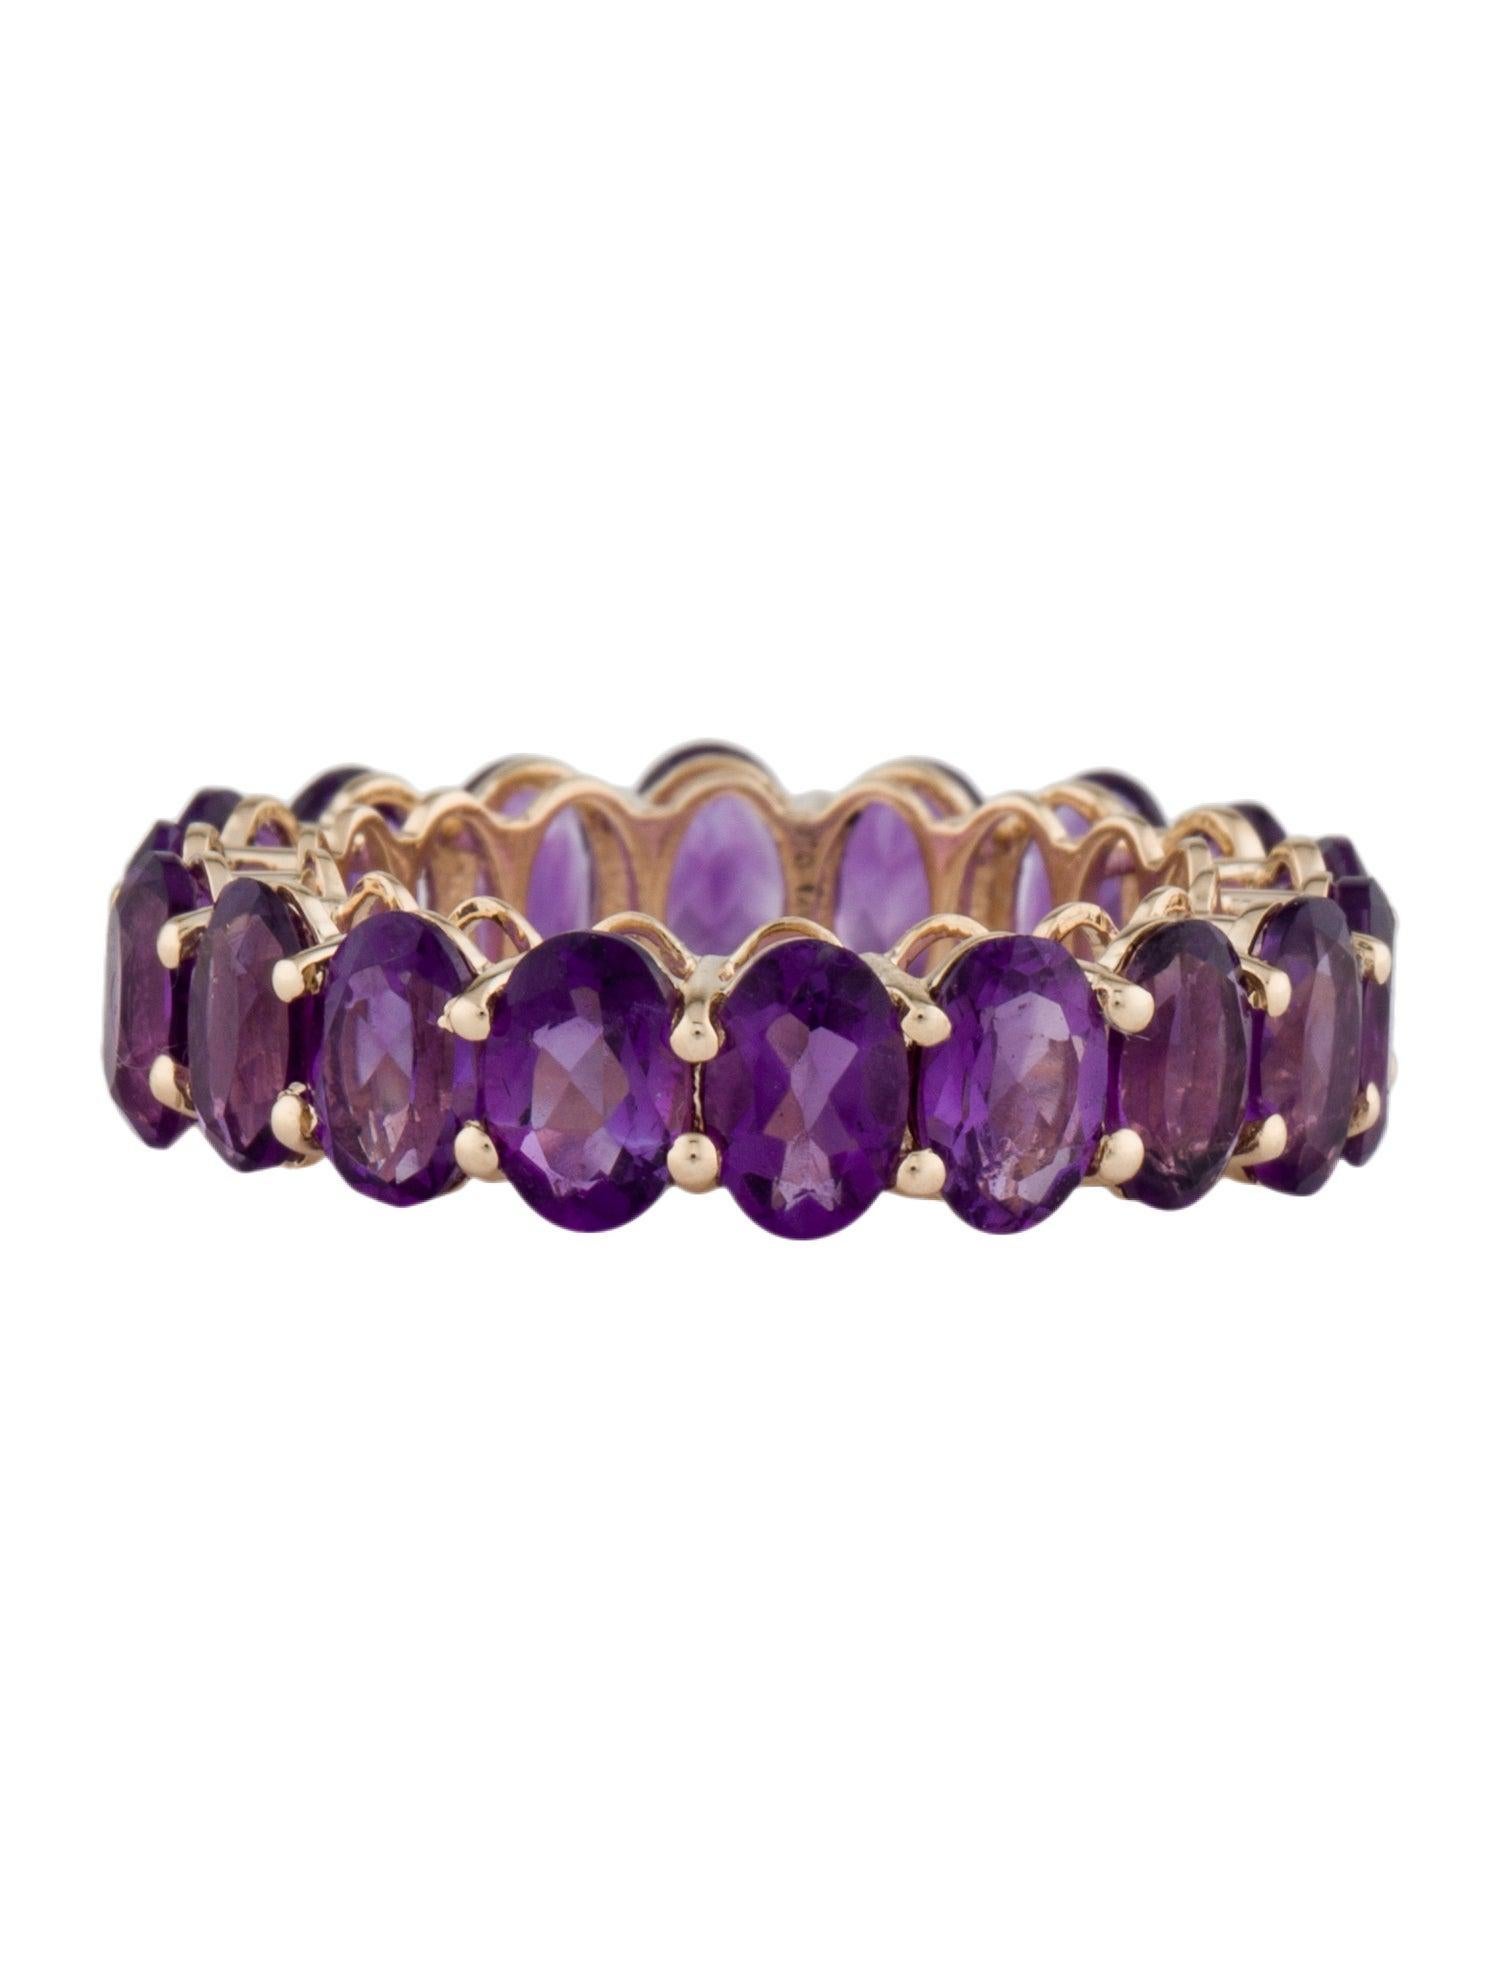 Oval Cut 14K Yellow Gold Amethyst Eternity Band, Size 7 Oval Brilliant Purple Amethysts For Sale